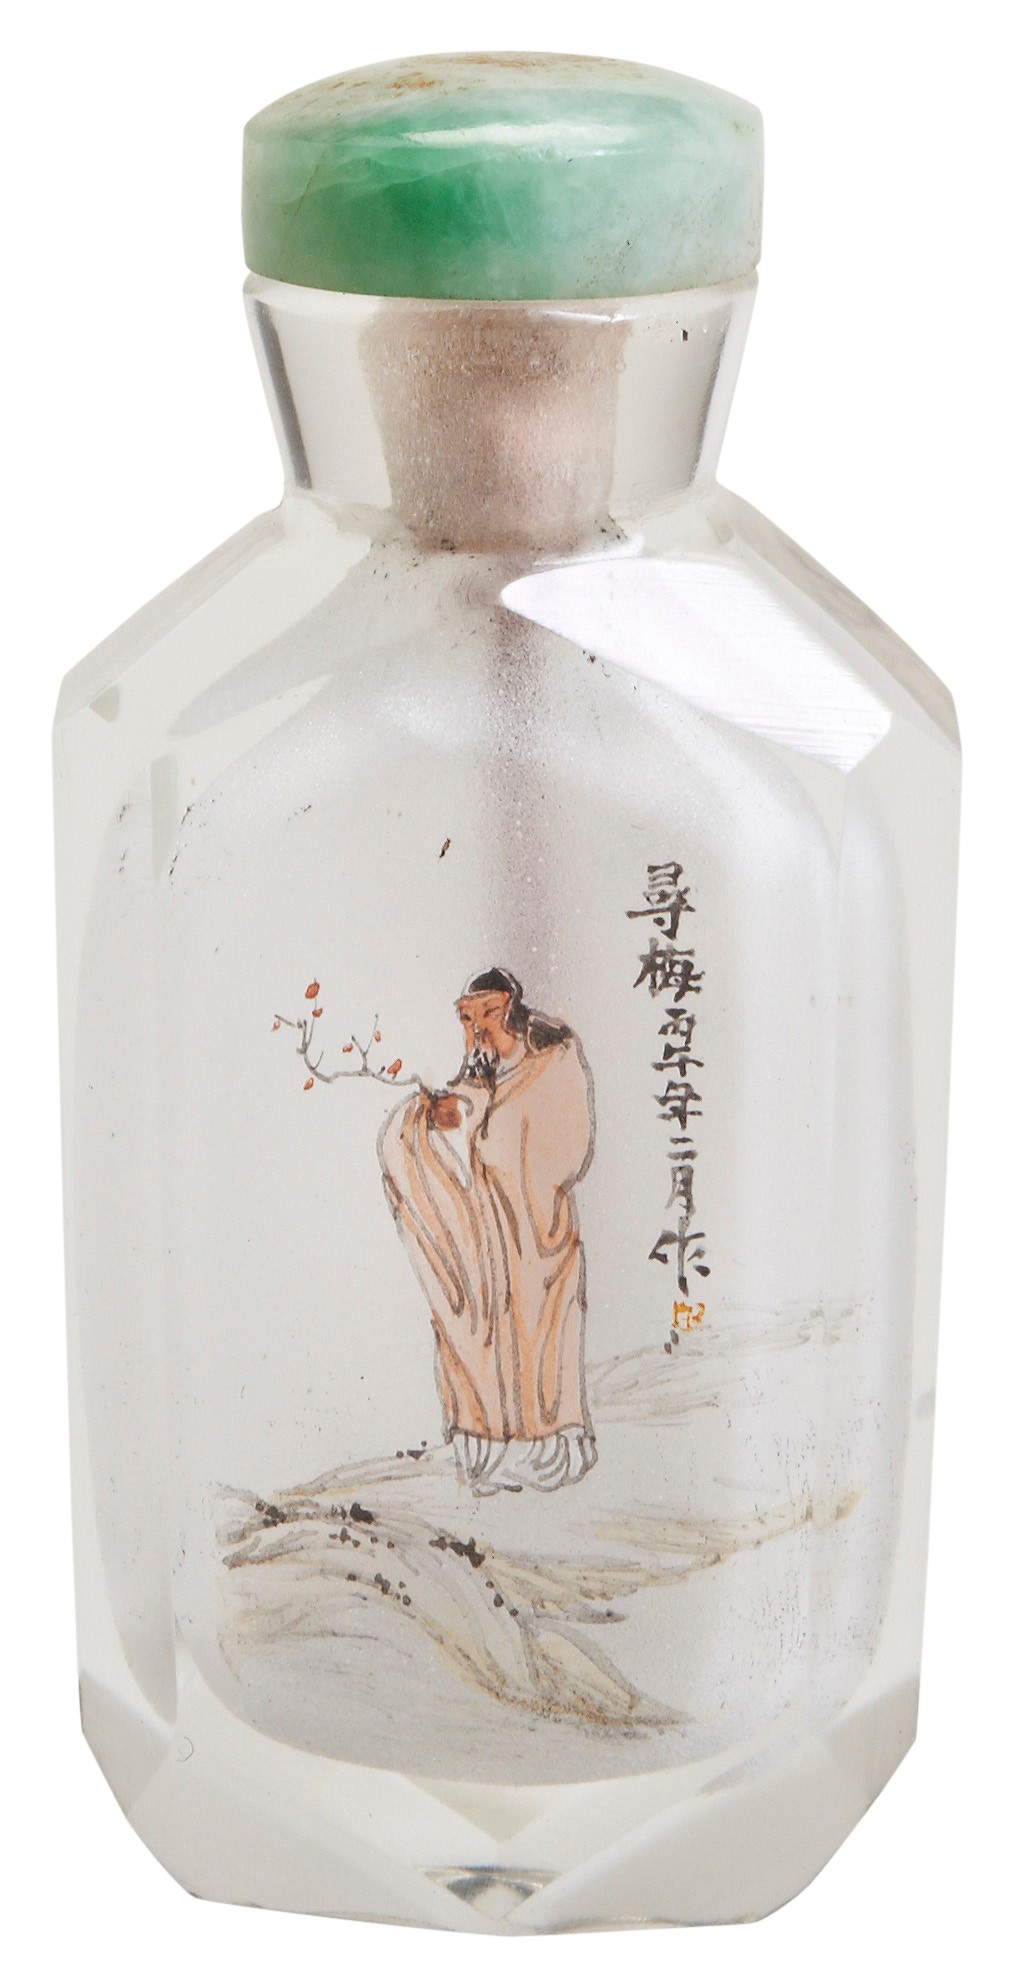 A CHINESE REVERSE PAINTED GLASS SNUFF BOTTLE  20TH CENTURY  depicting a scene of a scholar holding a - Image 2 of 2